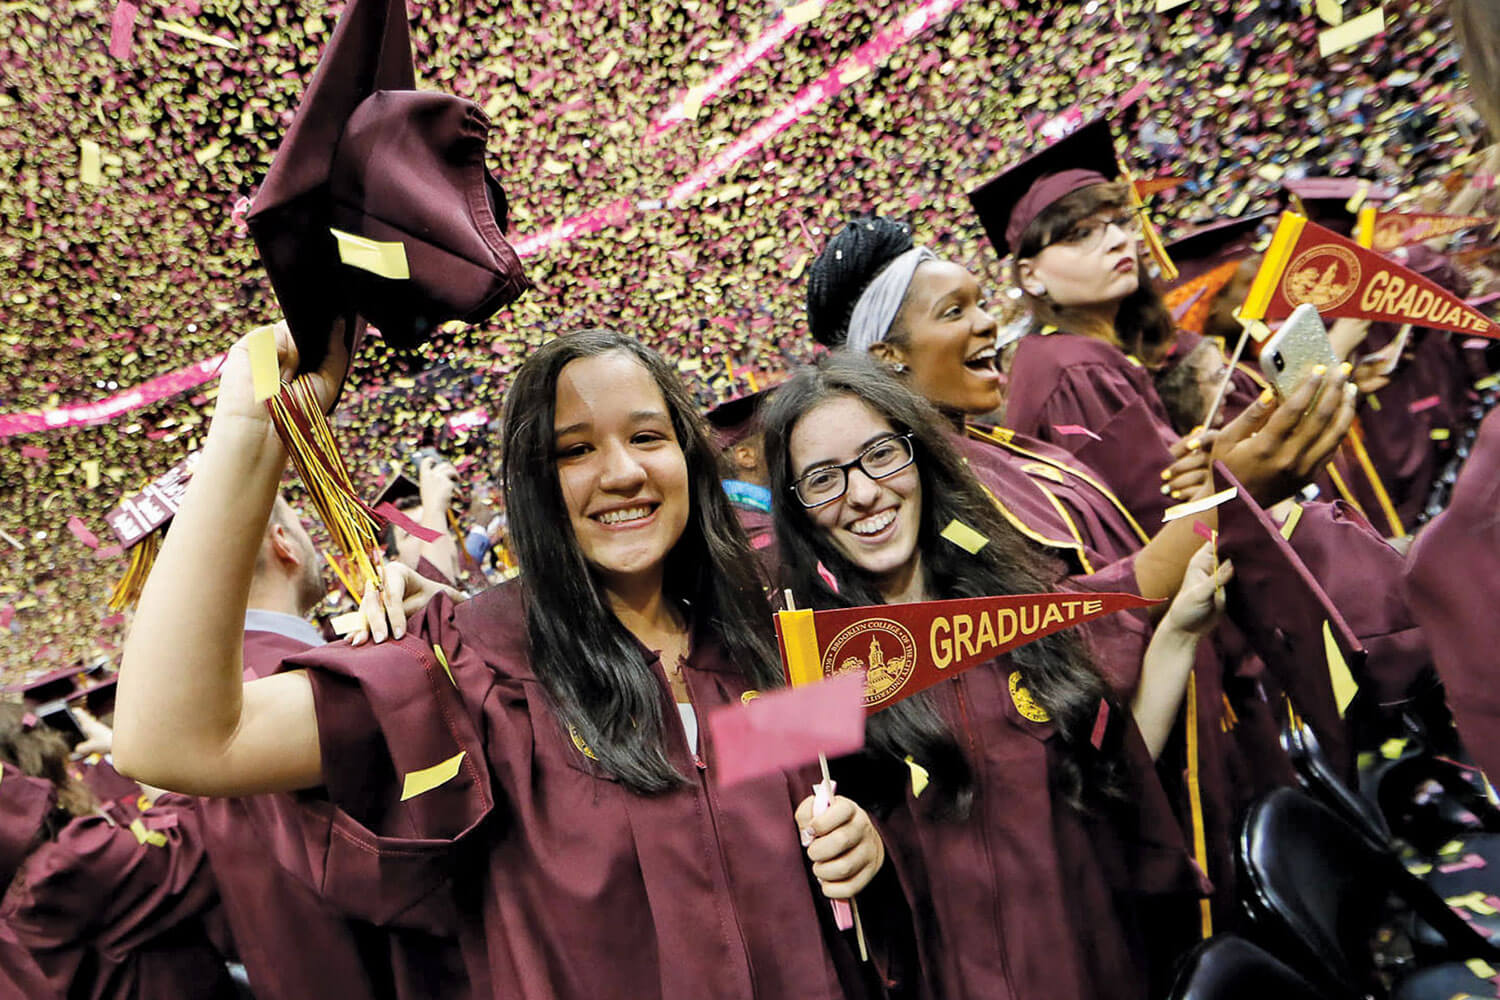 2019 Commencement Ceremony, May 30, 2019. Students celebrate their new status as graduates.